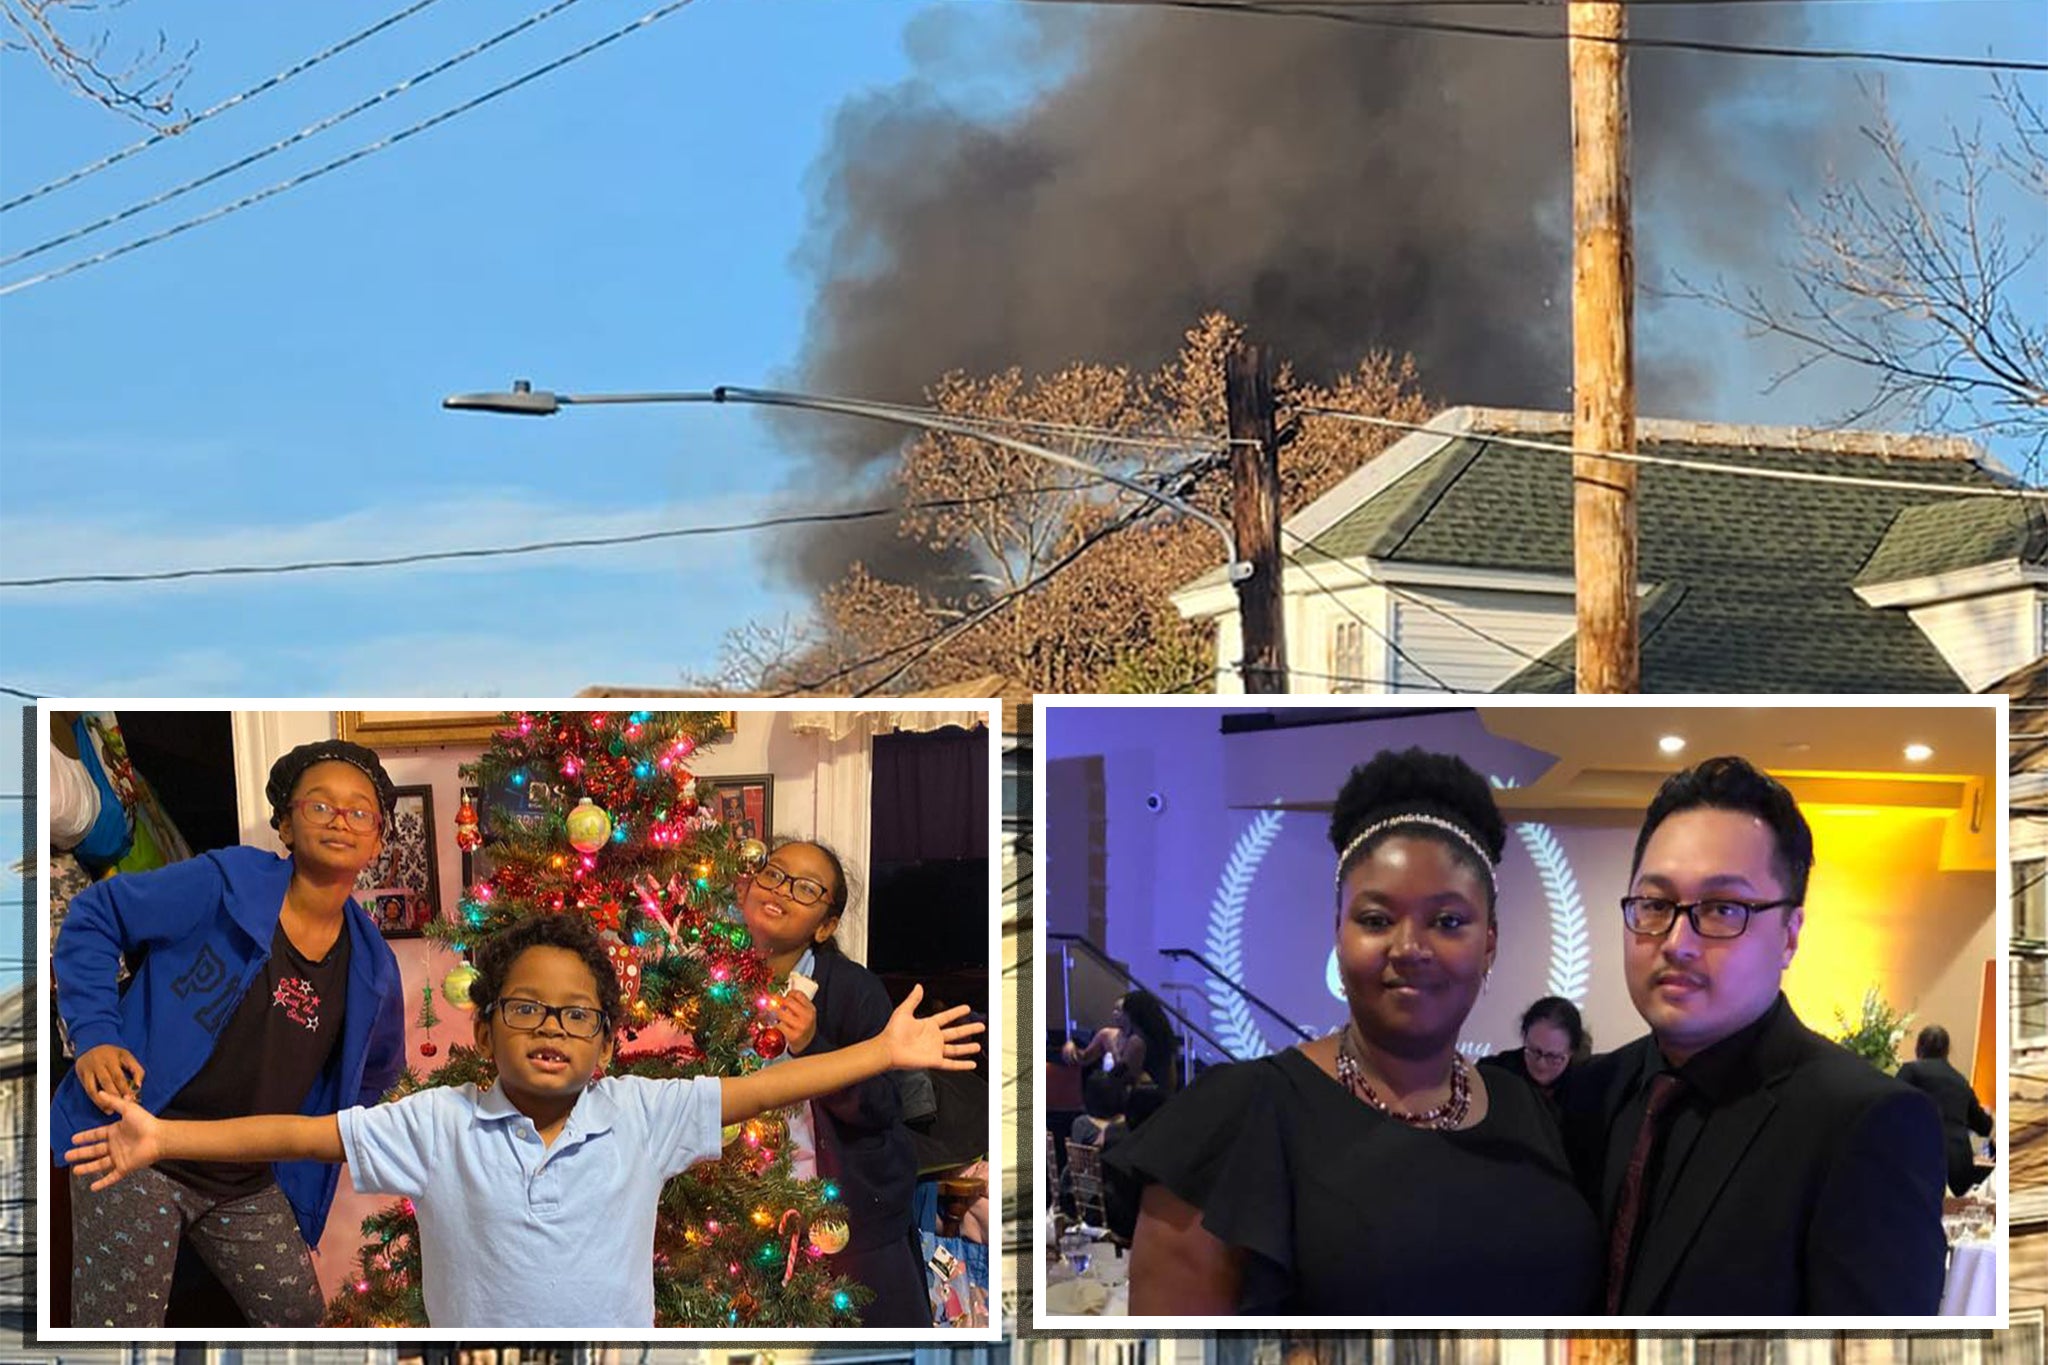 The crime scene on fire (top) and the victims Natalya, Xavier, and Nakayla Le (left); Britni McLaughlin-Le and Xuong Le (right)